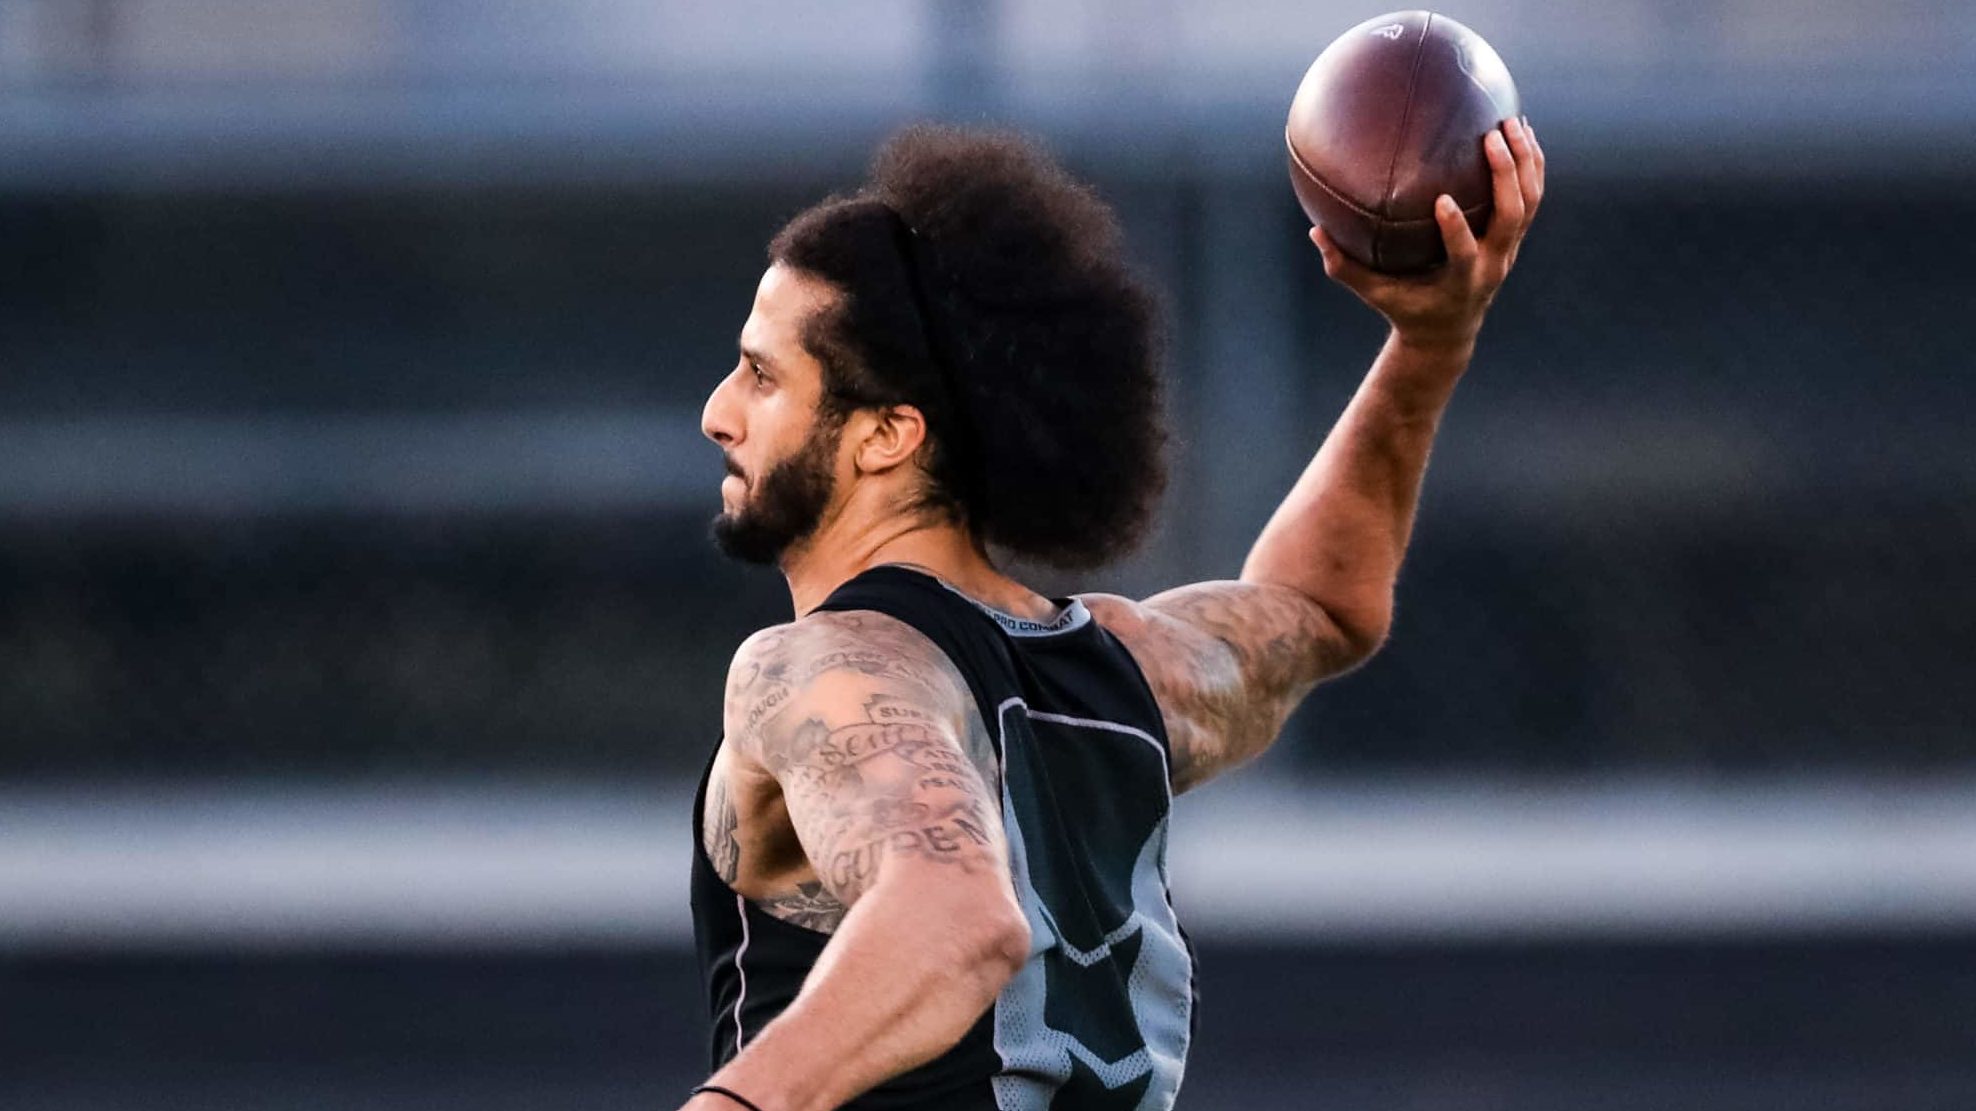 RIVERDALE, GA - NOVEMBER 16: Colin Kaepernick looks to pass during his NFL workout held at Charles R Drew high school on November 16, 2019 in Riverdale, Georgia.